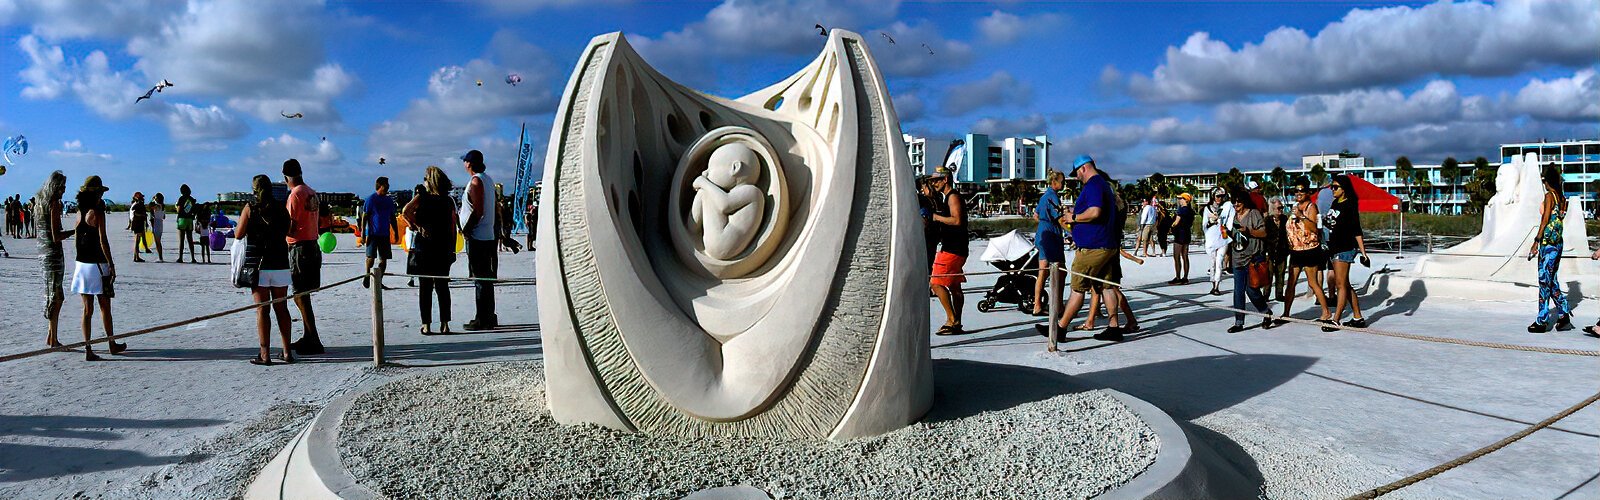 “Gestation,” by sculptor Fergus Mulvany of Ireland, can be admired at the Sanding Ovations international exhibition, which has an encore weekend at Treasure Island on November 25th and 26.